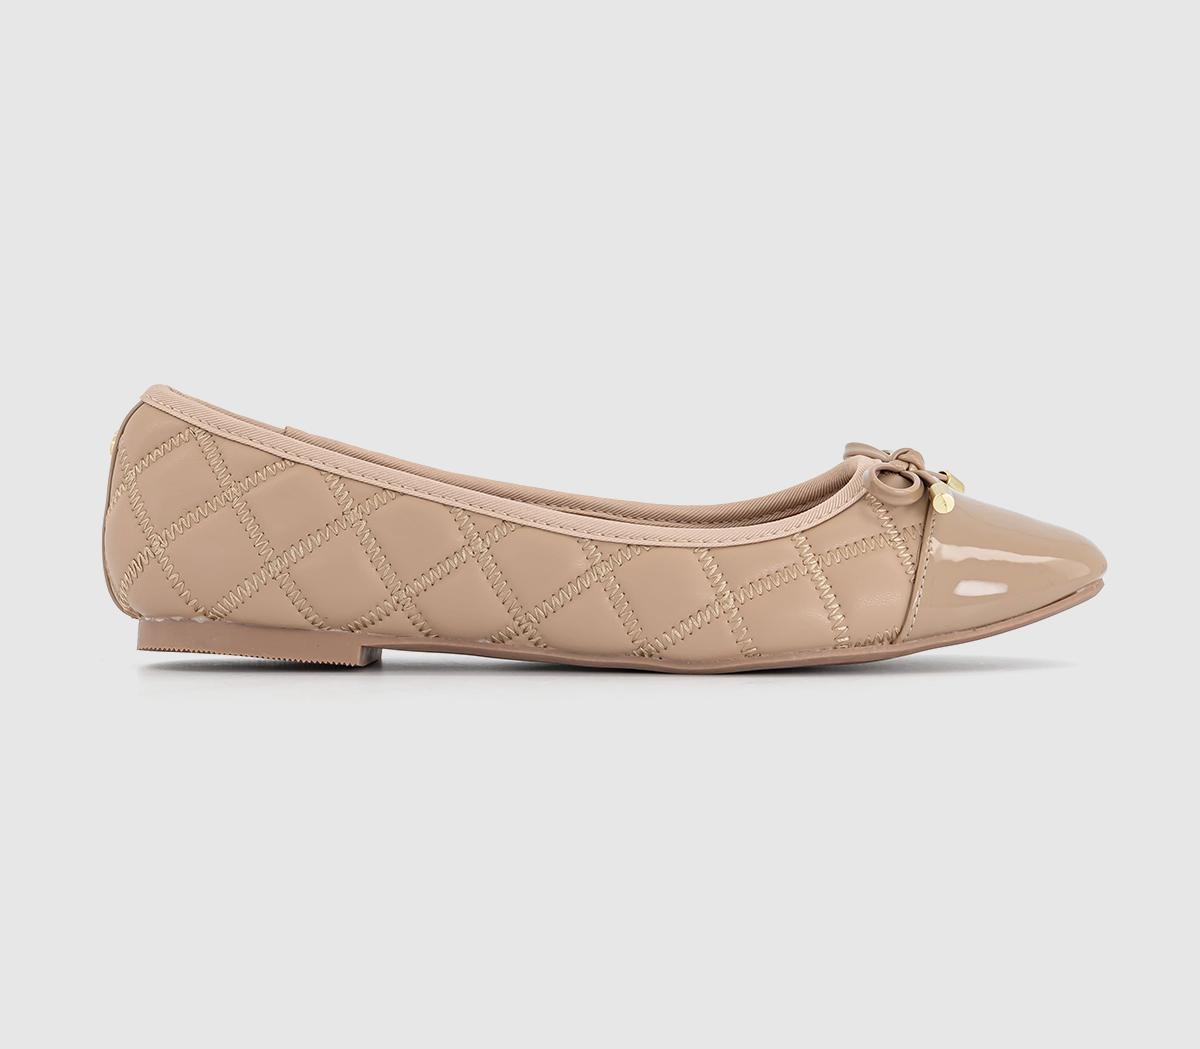 OFFICEForeveryoung Quilted Toe Cap Bow Ballet PumpsBeige